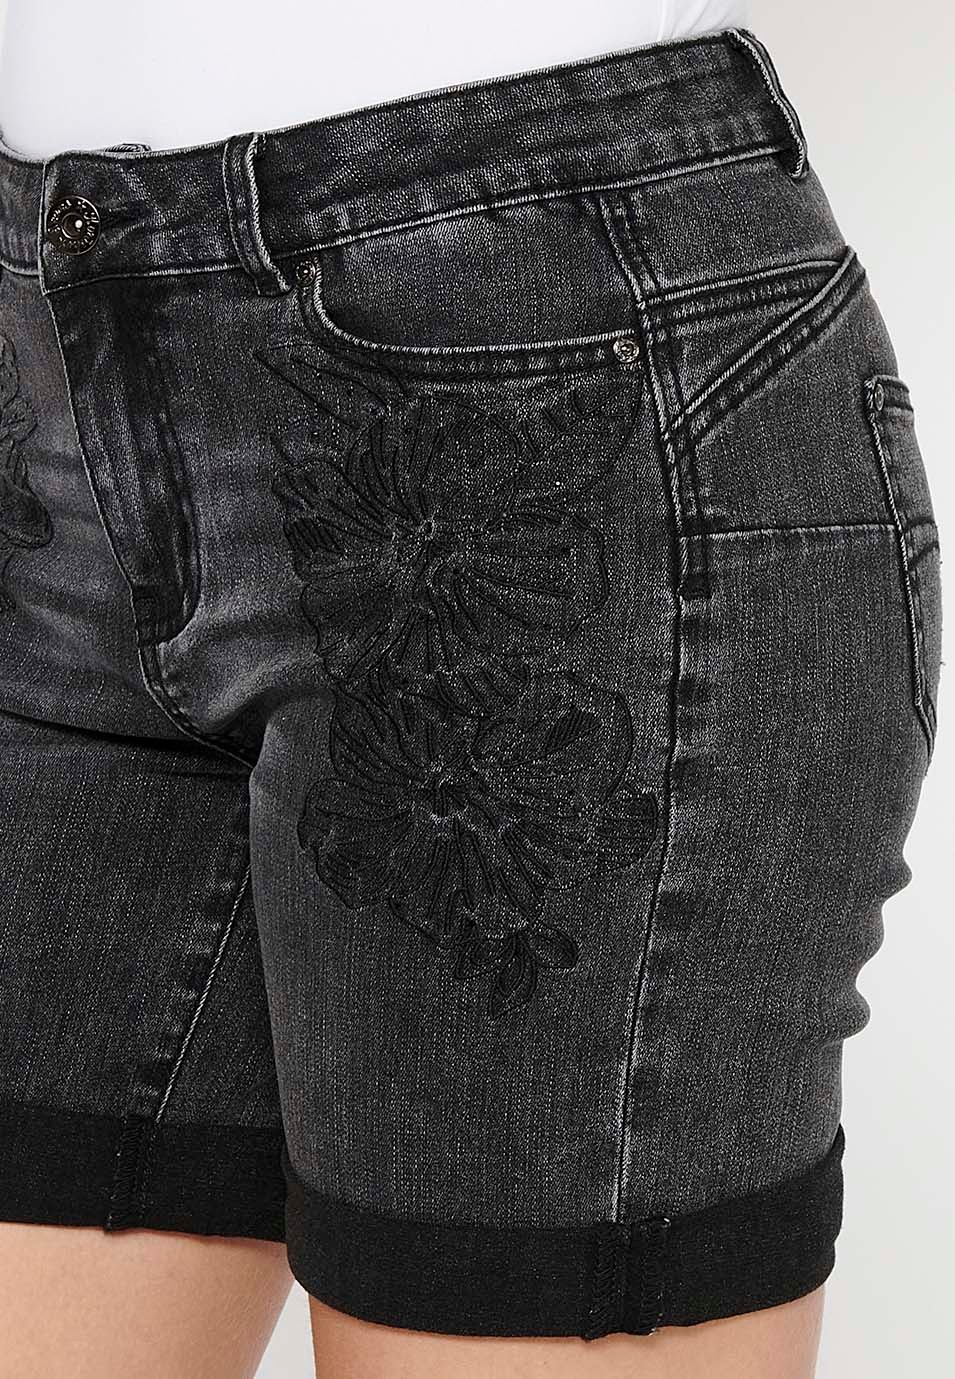 Shorts with a turn-up finish with front closure with zipper and button and floral embroidery in Black for Women 1